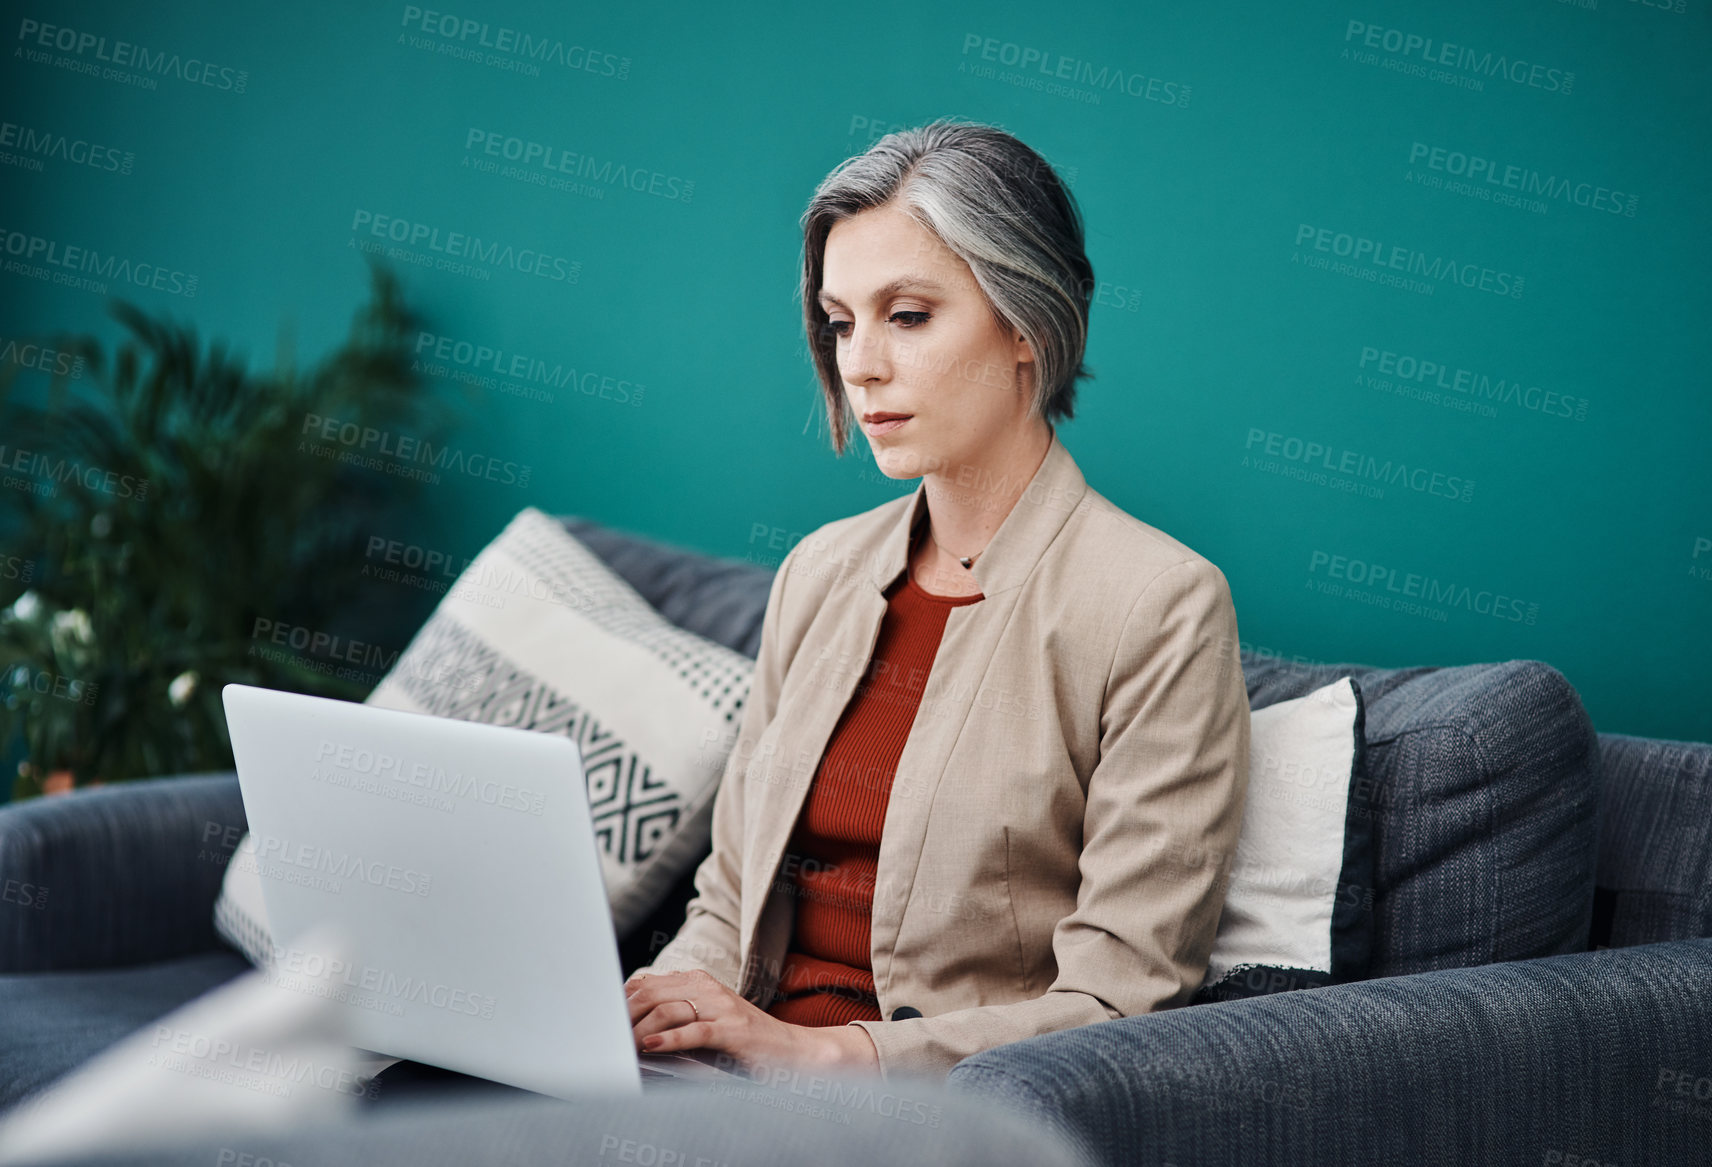 Buy stock photo Cropped shot of an attractive mature businesswoman sitting alone and using a laptop in her home office